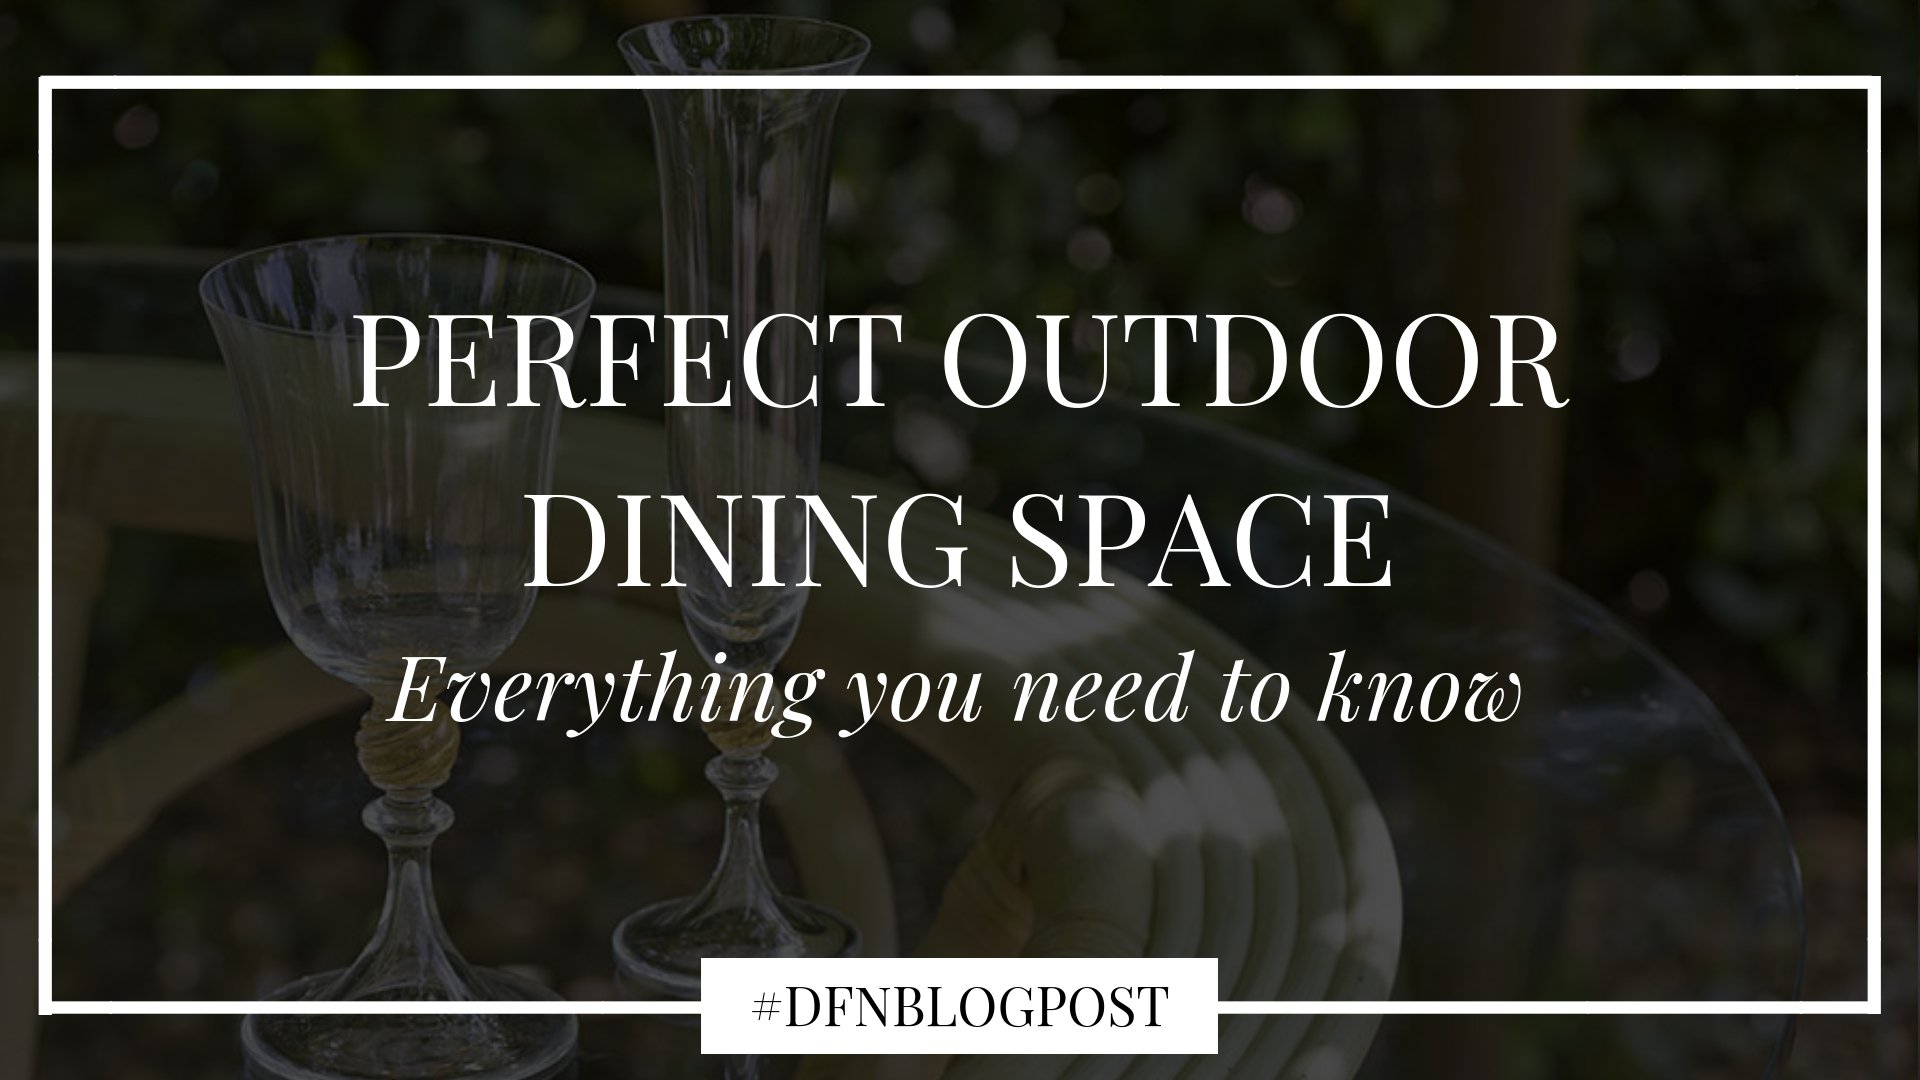 Designing the perfect outdoor dining space: everything you need to know